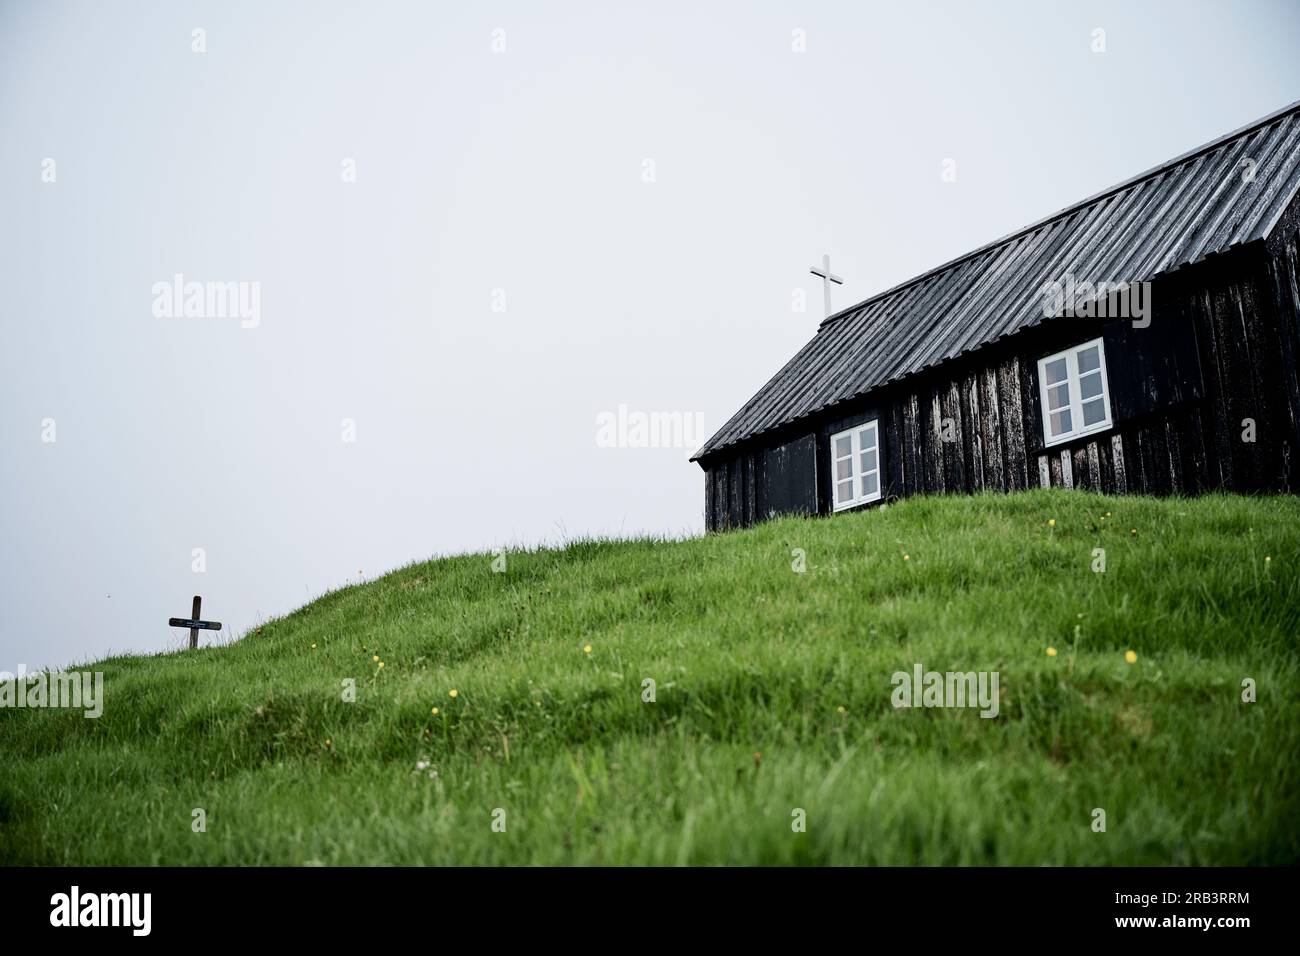 Aged church with cross on grassy meadow Stock Photo